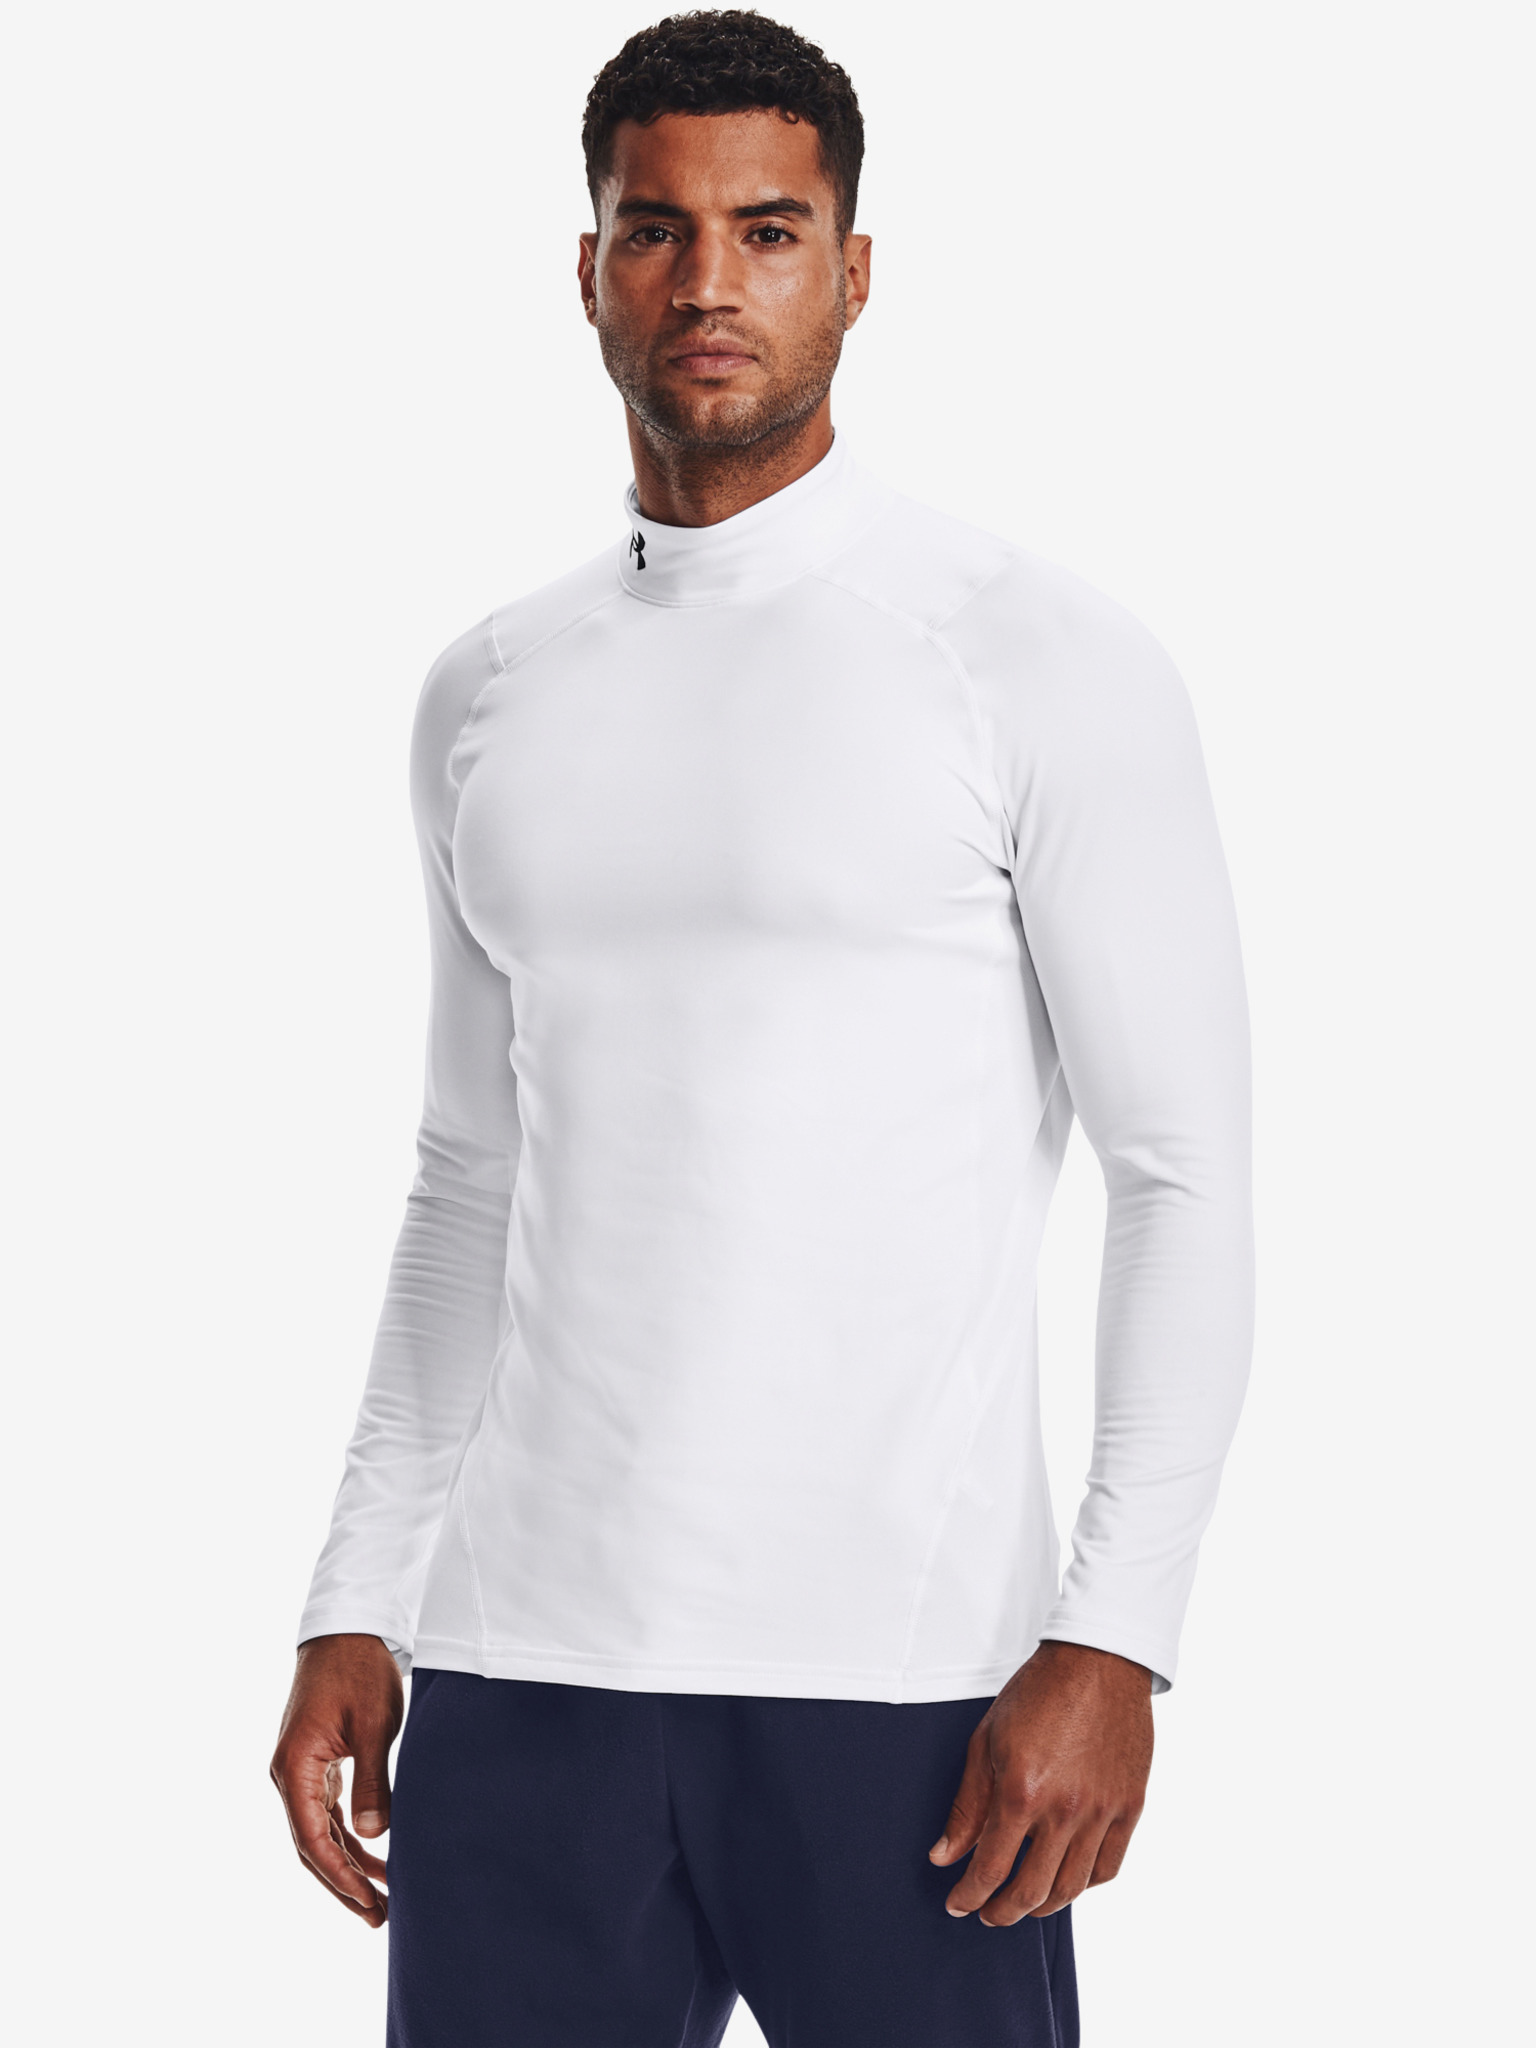  Under Armour Men's ColdGear Reactor Fitted Long Sleeve